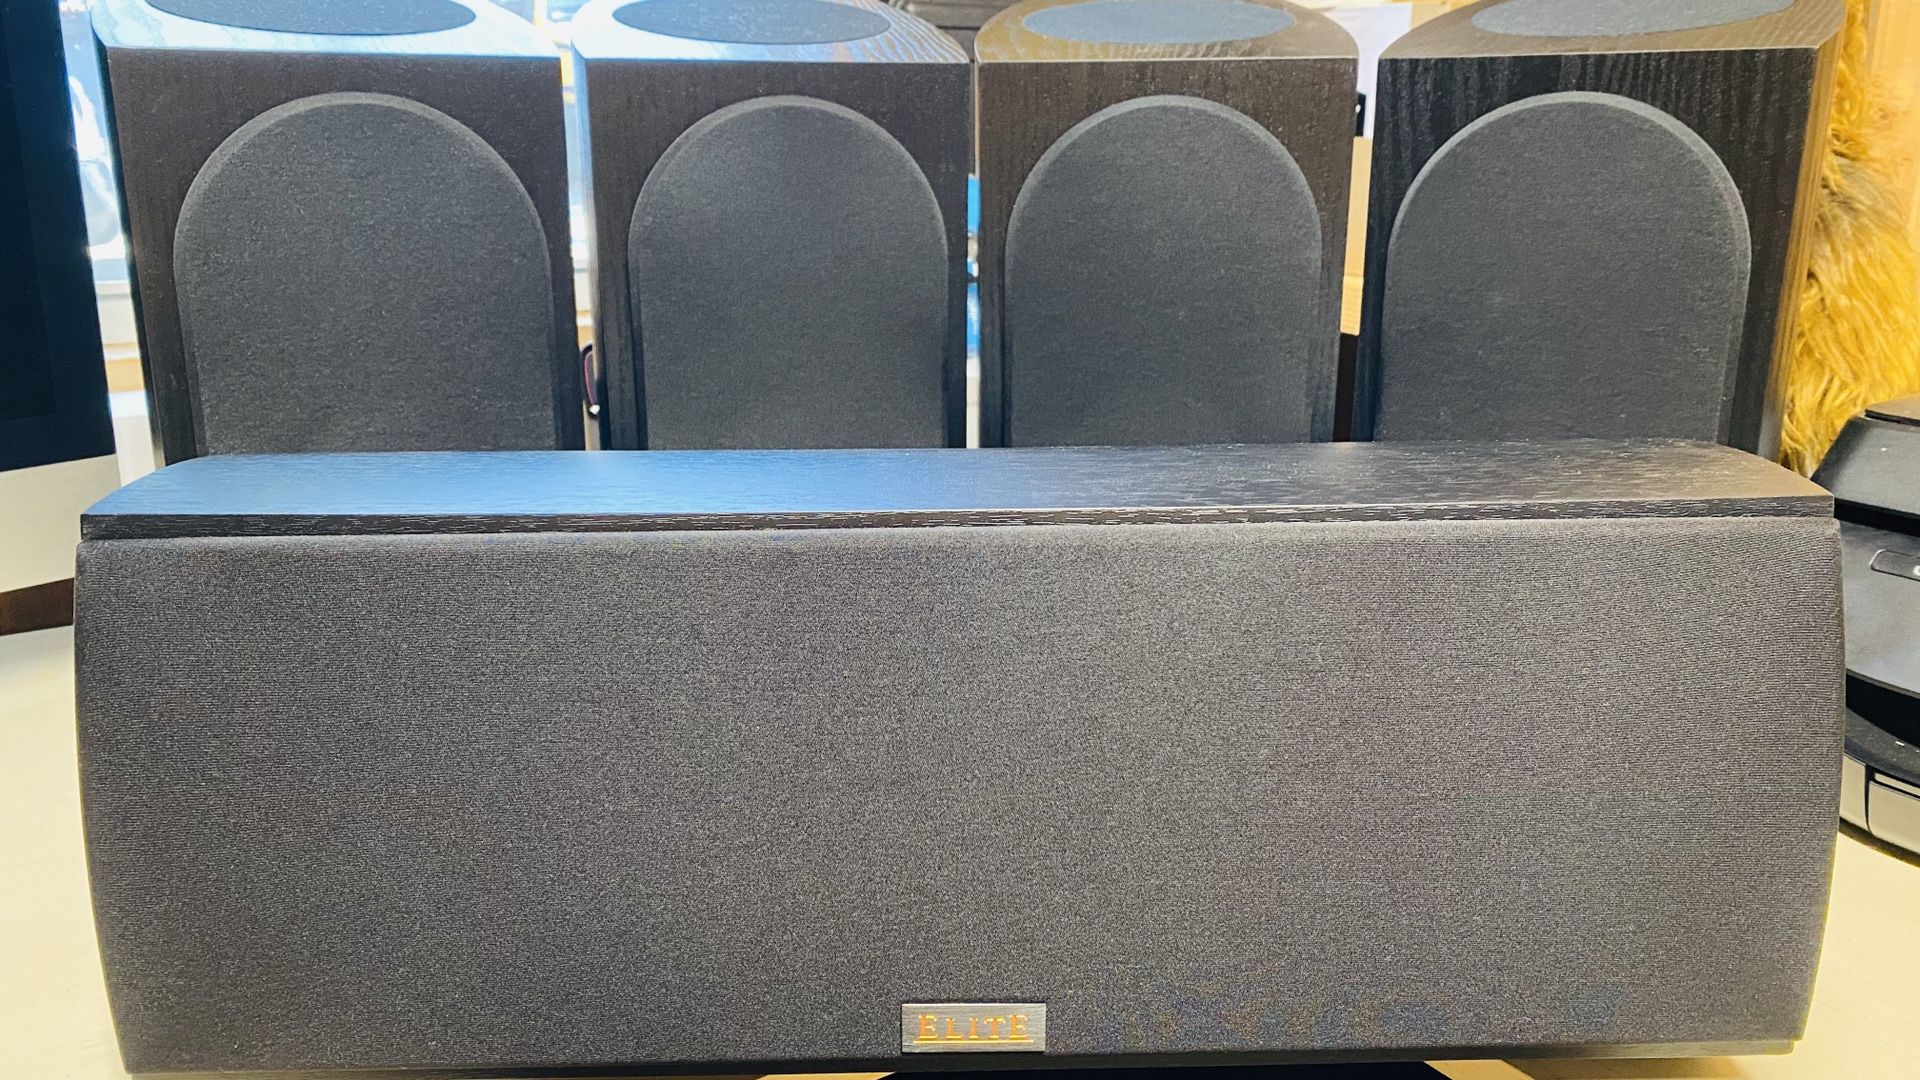 I'm selling 4 Pioneer SP-BS22A-LR Dolby Atmos Speakers. And a ELITE Center Channel. I bought these to try out Dolby Atmos. Now I know it’s amazing.